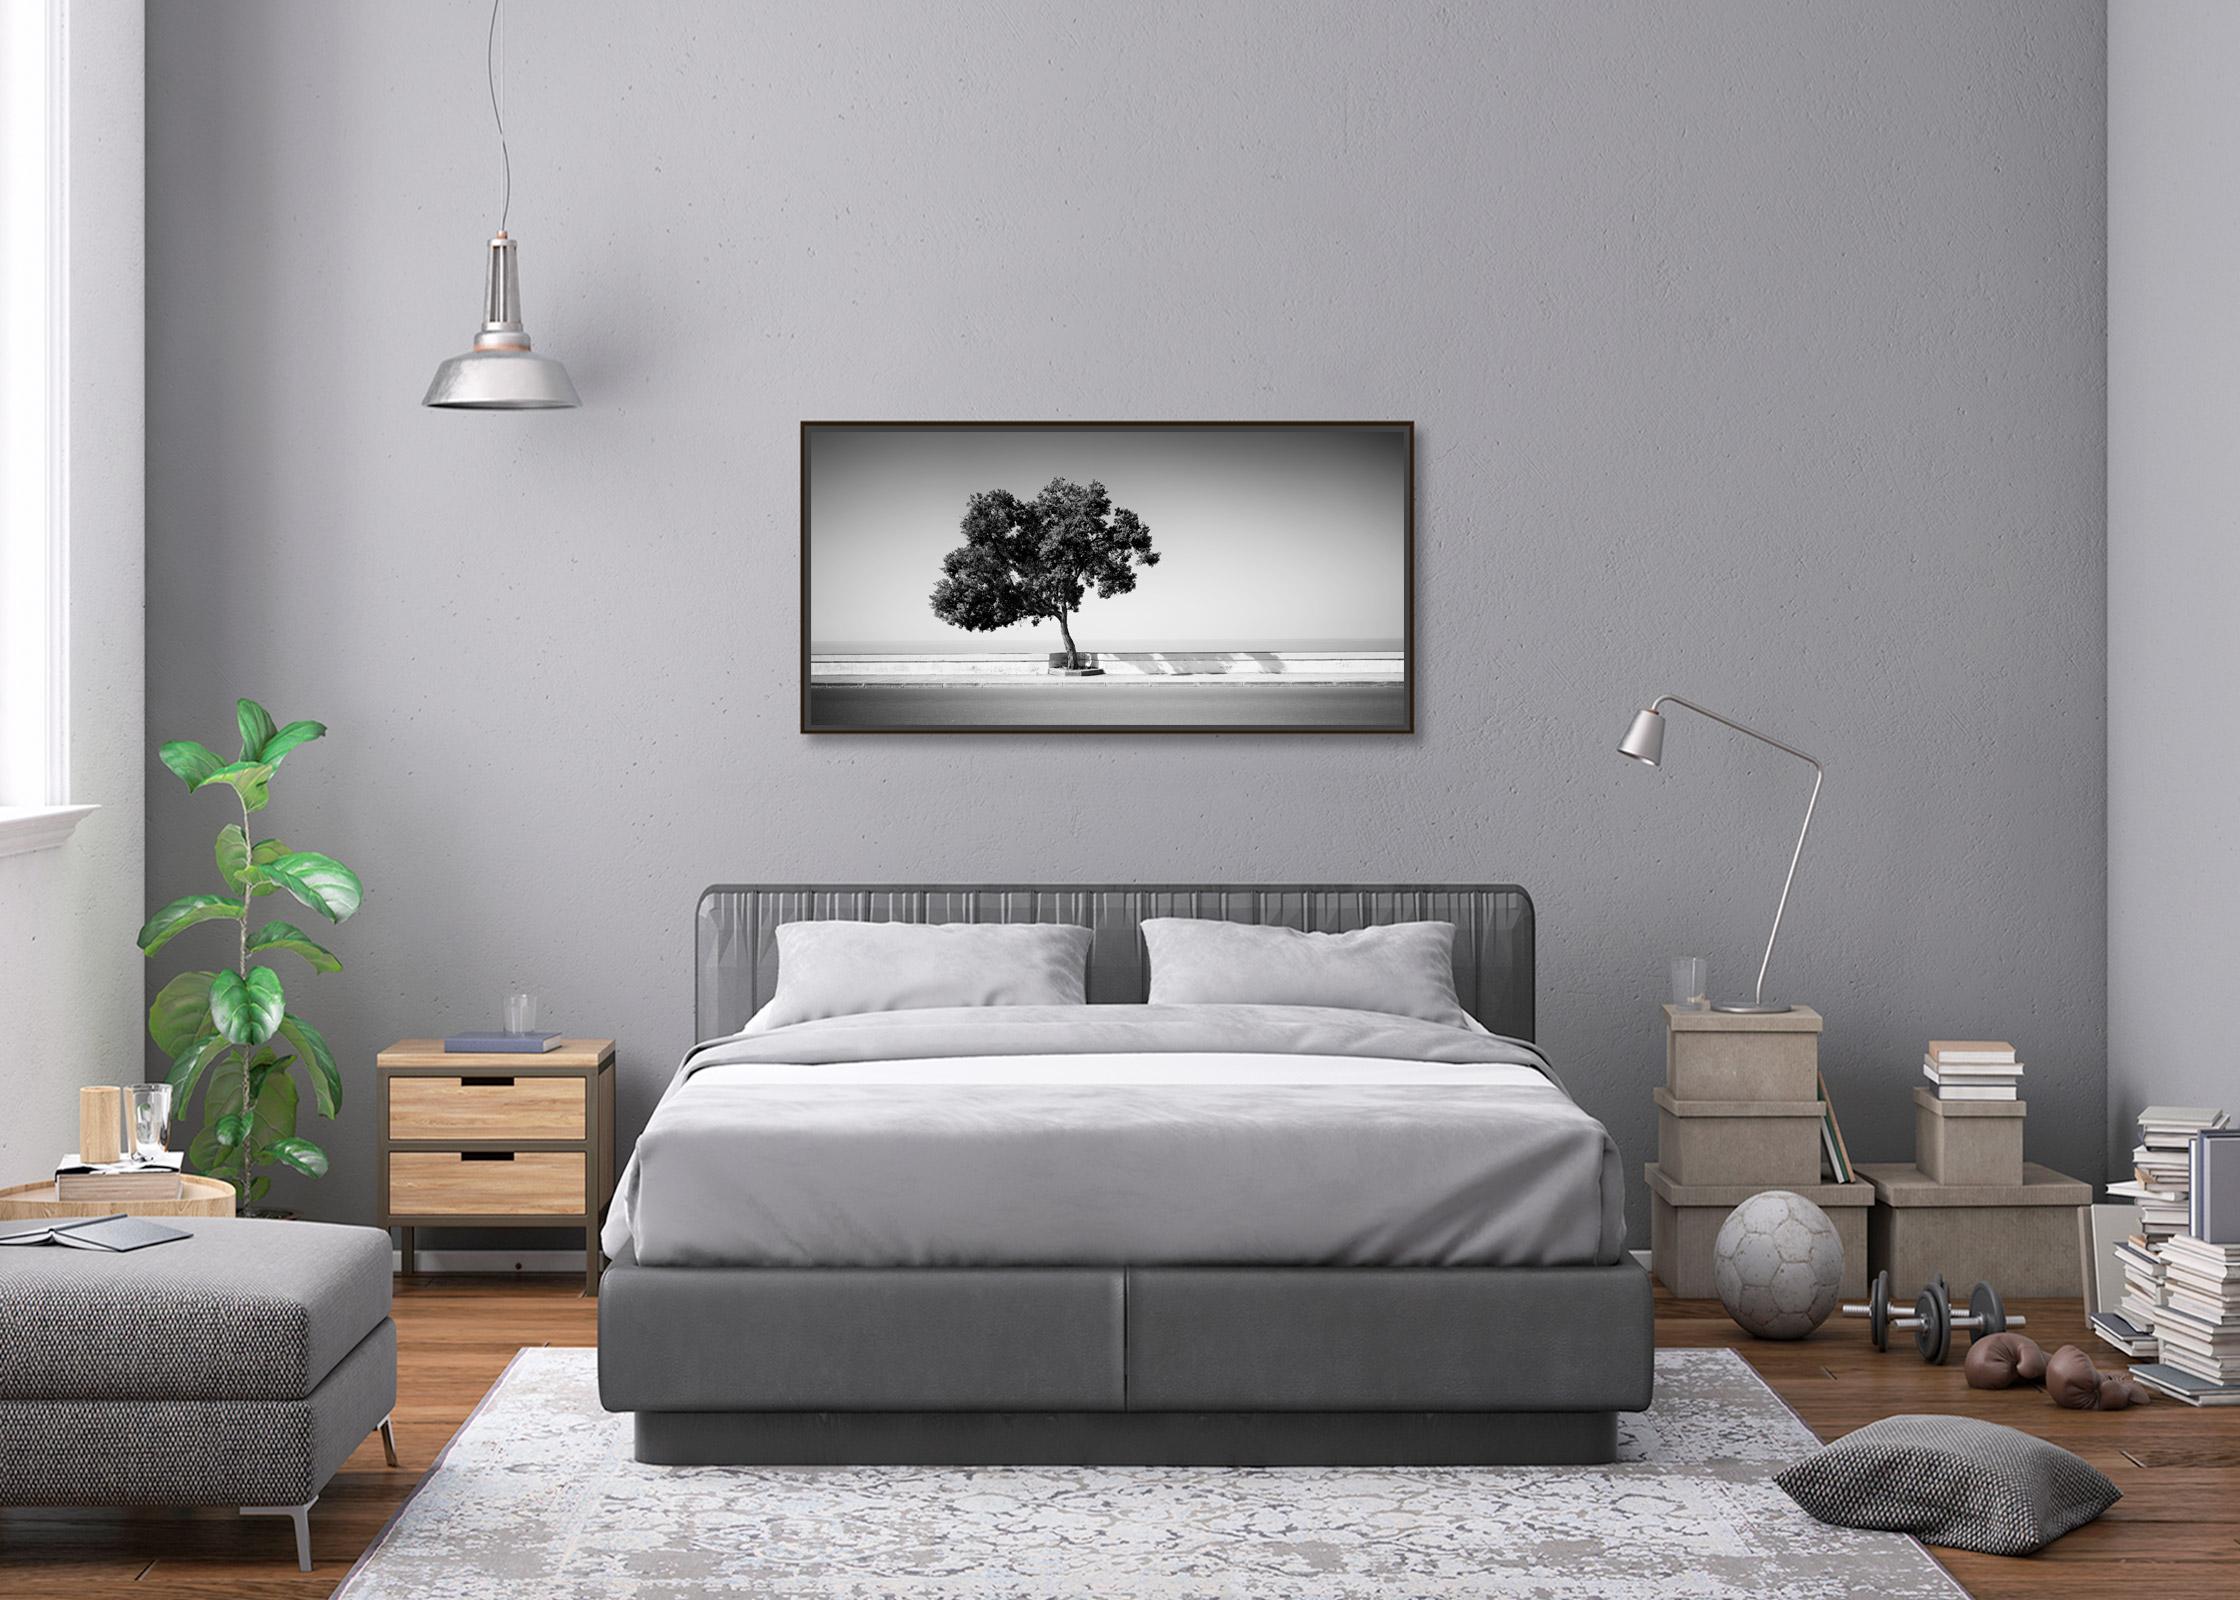 Black and white fine art panorama landscape photography print. Archival pigment ink print, edition of 8. Signed, titled, dated and numbered by artist. Certificate of authenticity included. Printed with 4cm white border.
International award winner